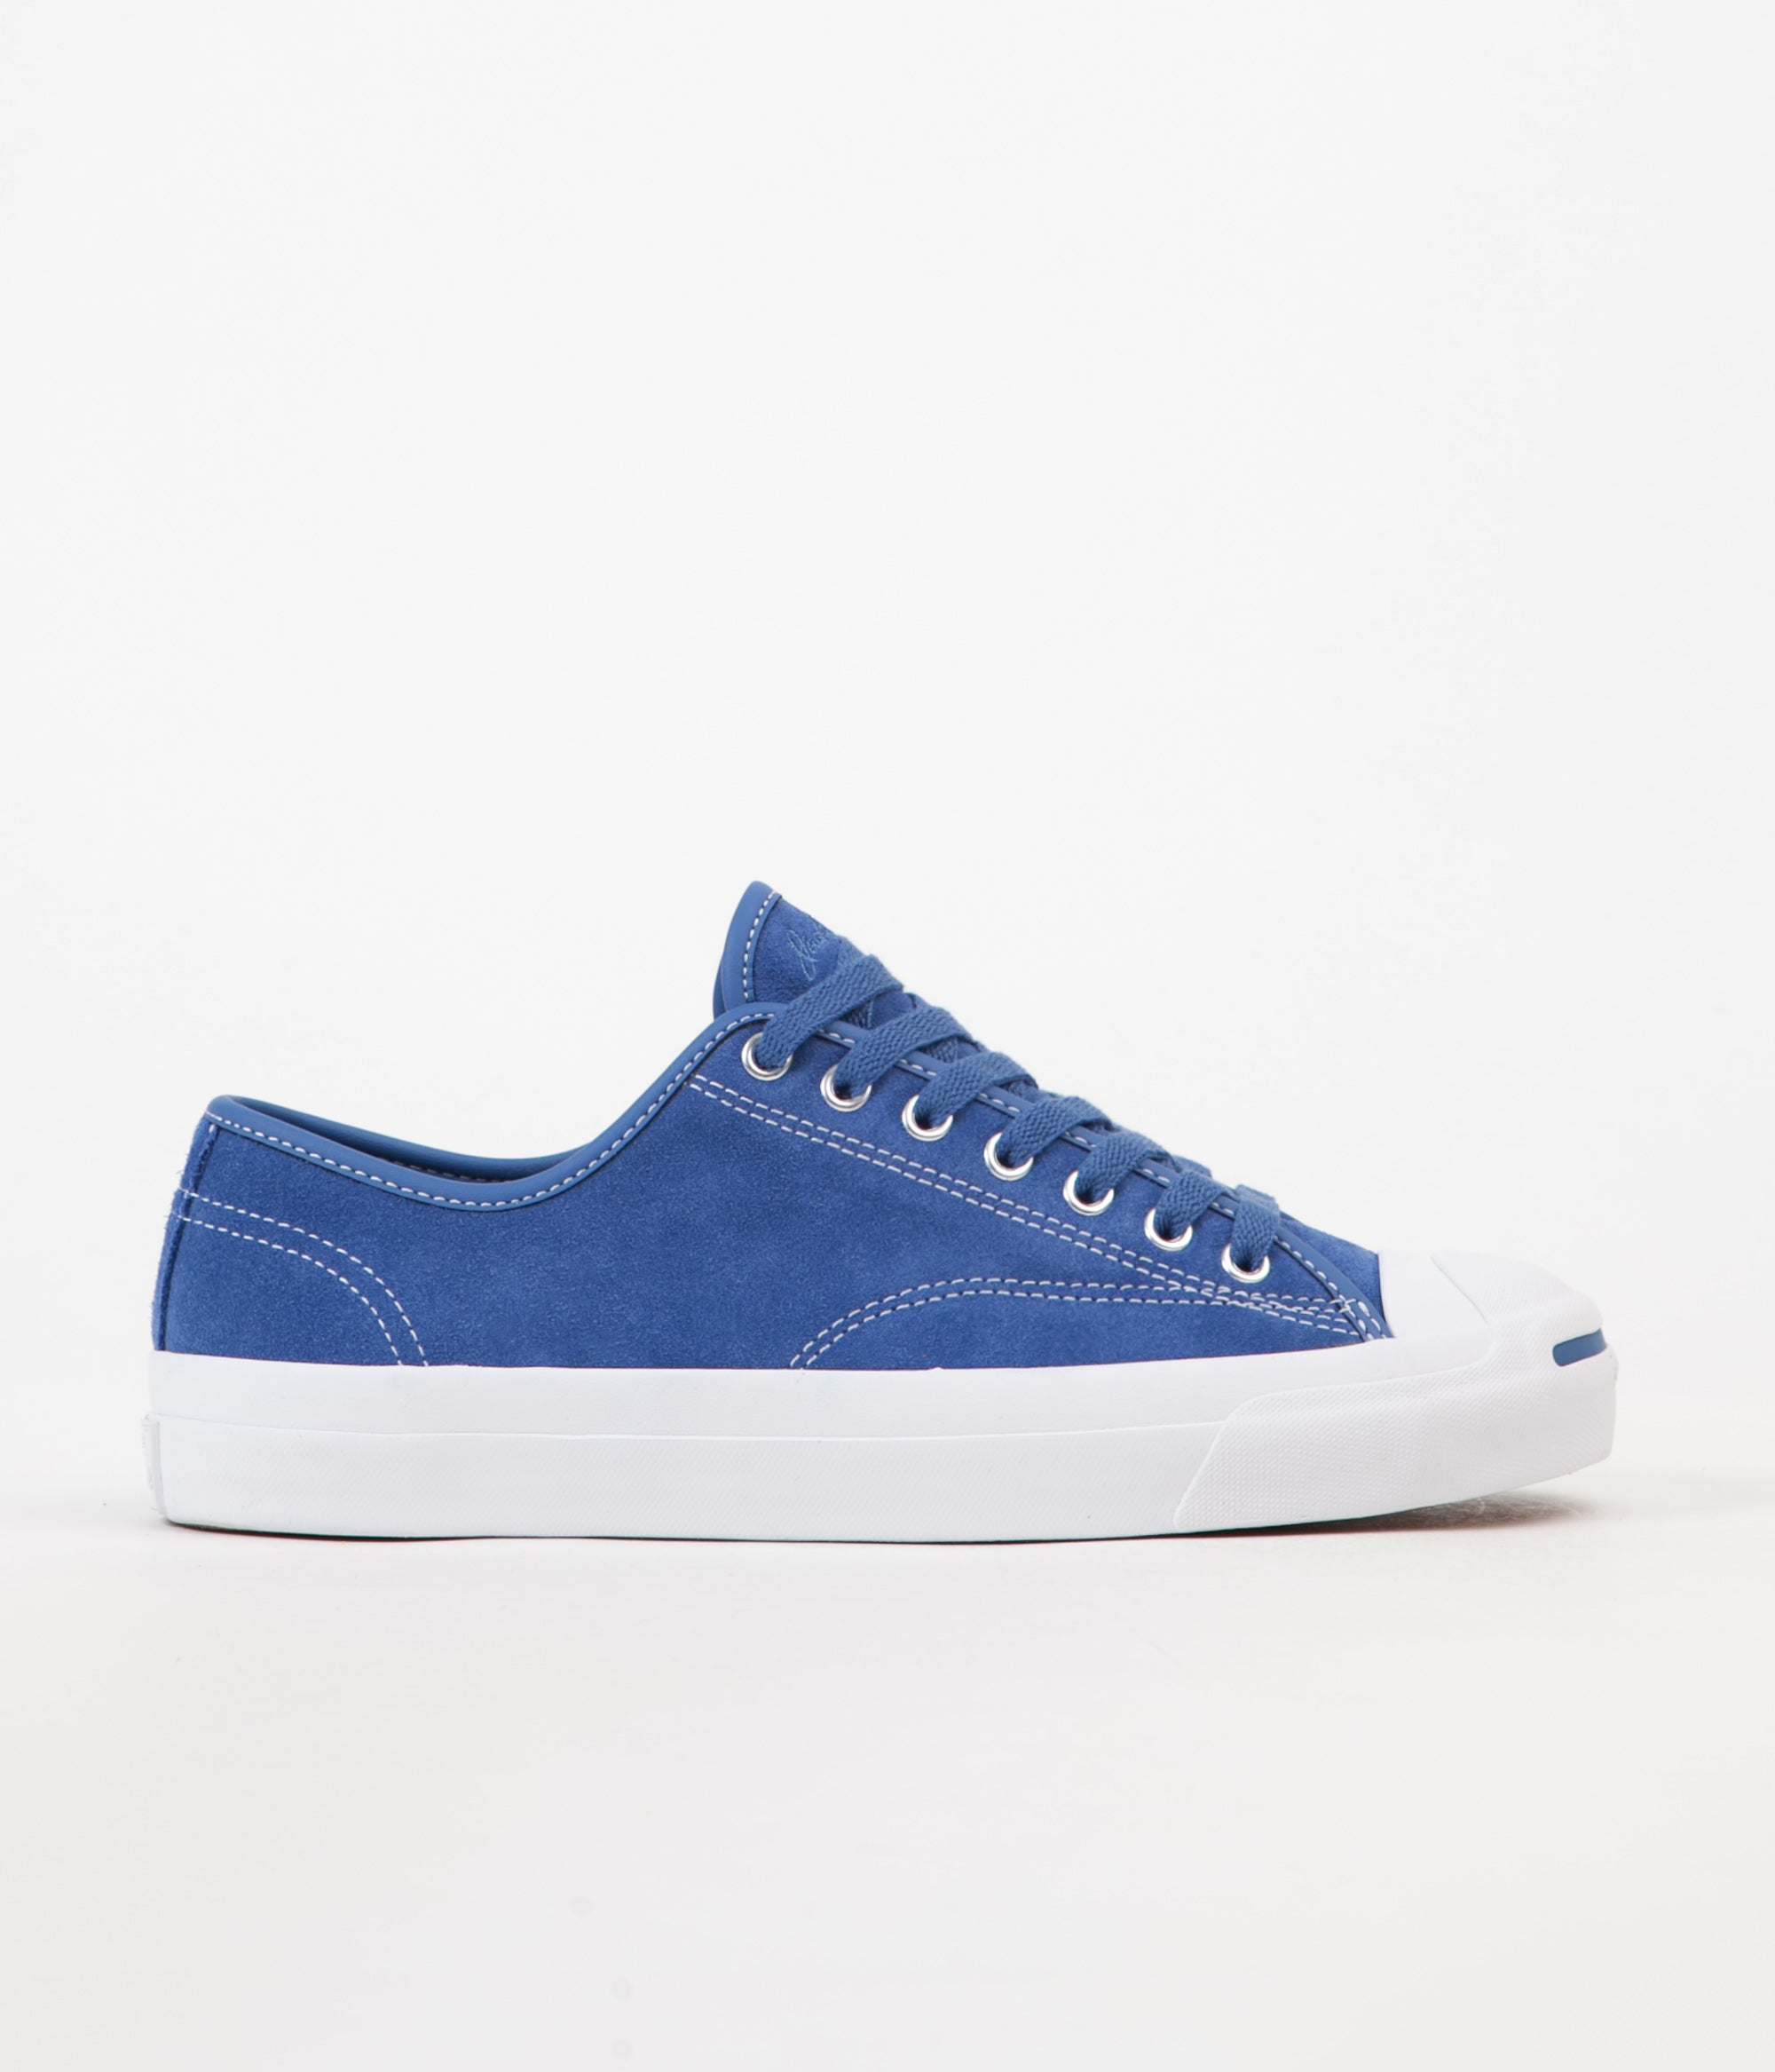 Converse Jack Purcell Pro Ox Shoes 